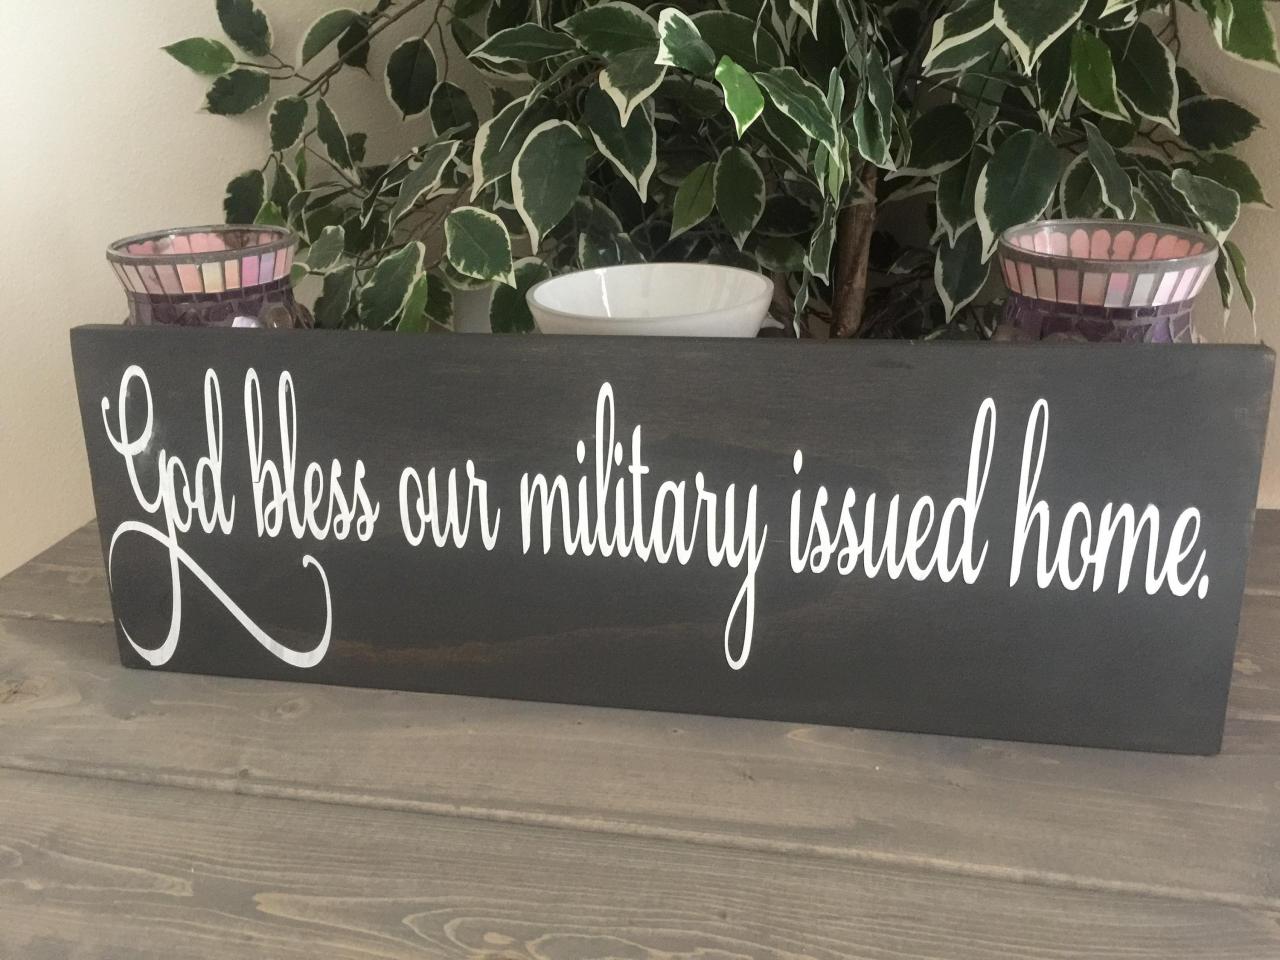 God Bless Our Military Issued Home Hand Painted Wood Sign. 8x24